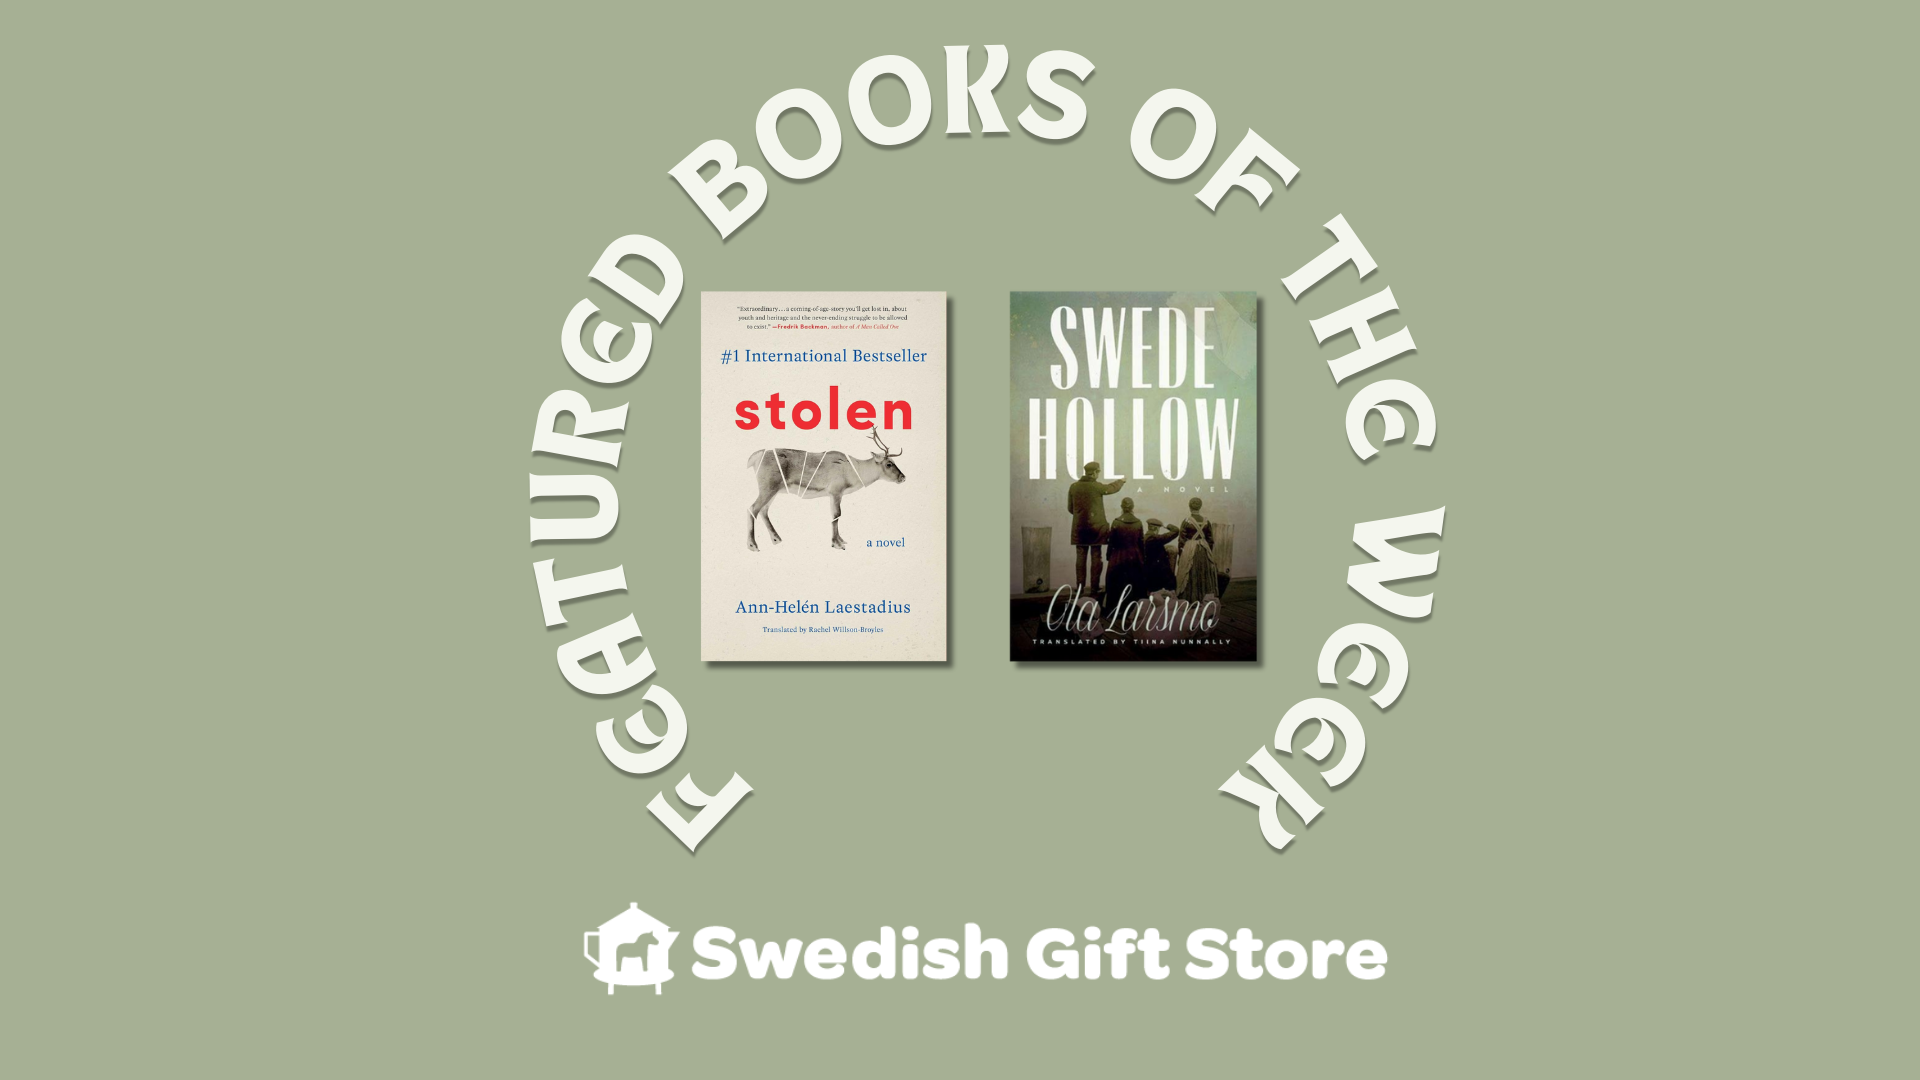 Book Club Wednesday 4-24-24 - Featuring Stolen and Swede Hollow